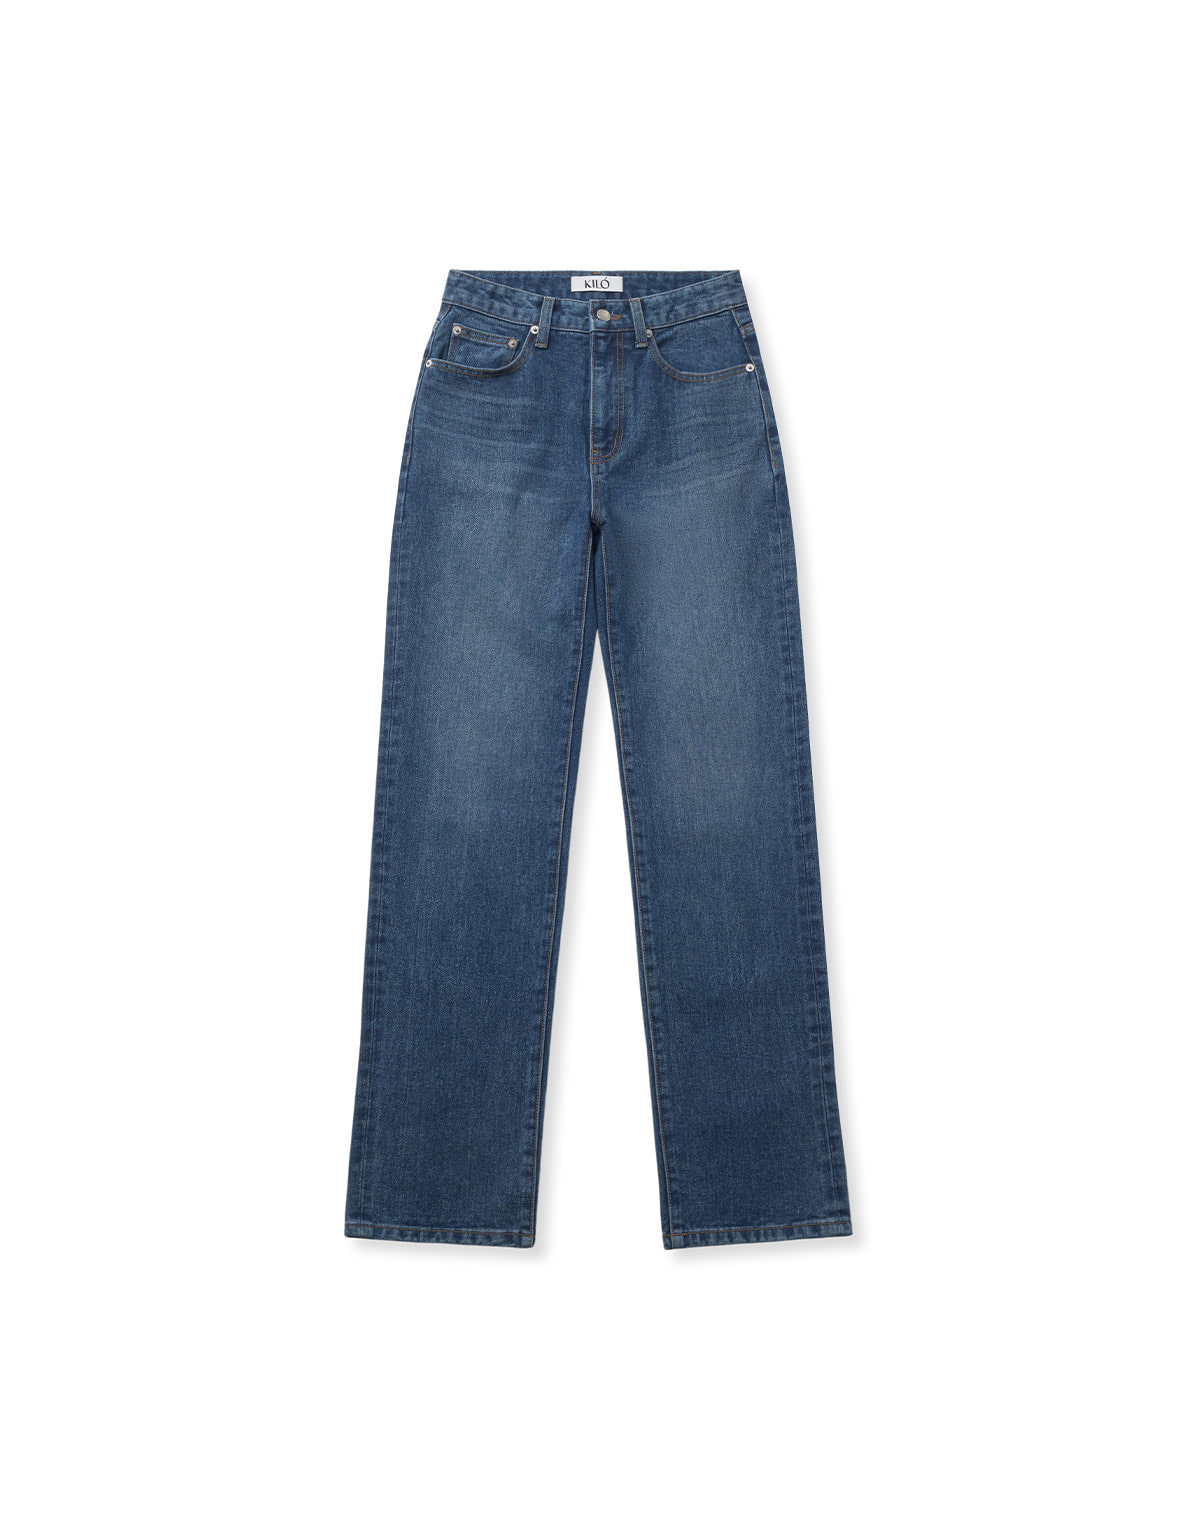 CLASSIC STRAIGHT JEANS (CLASSIC BLUE)